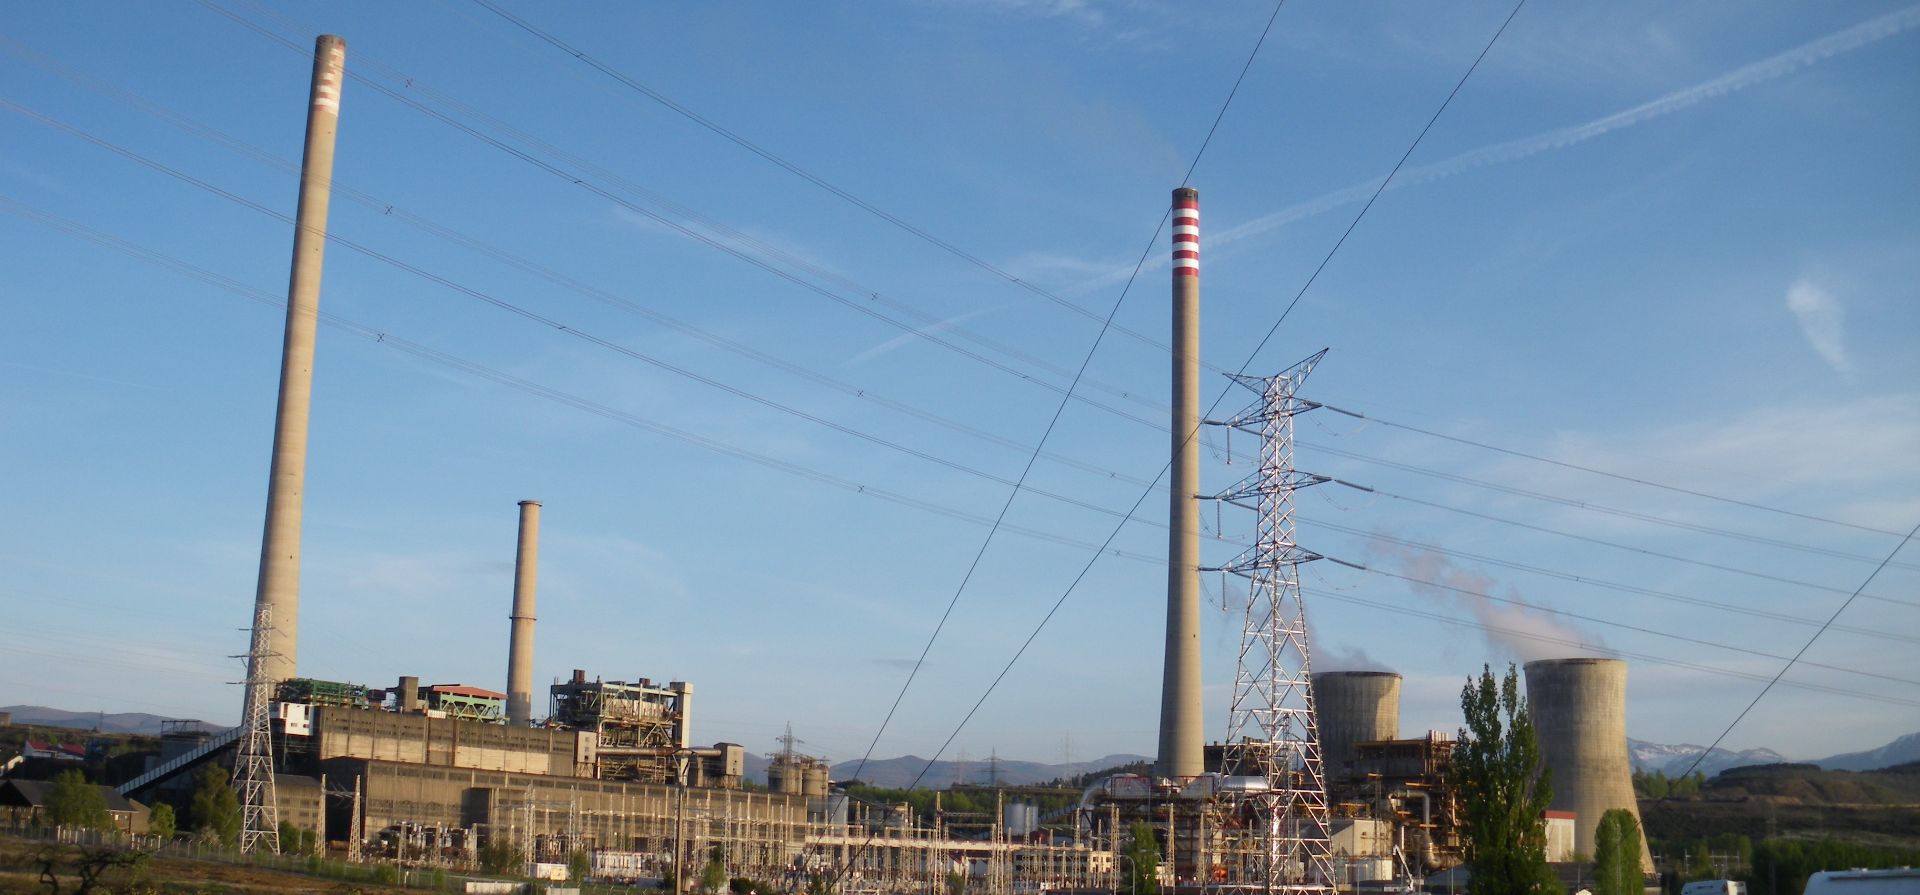 A view of the Compostilla coal plant and its power lines